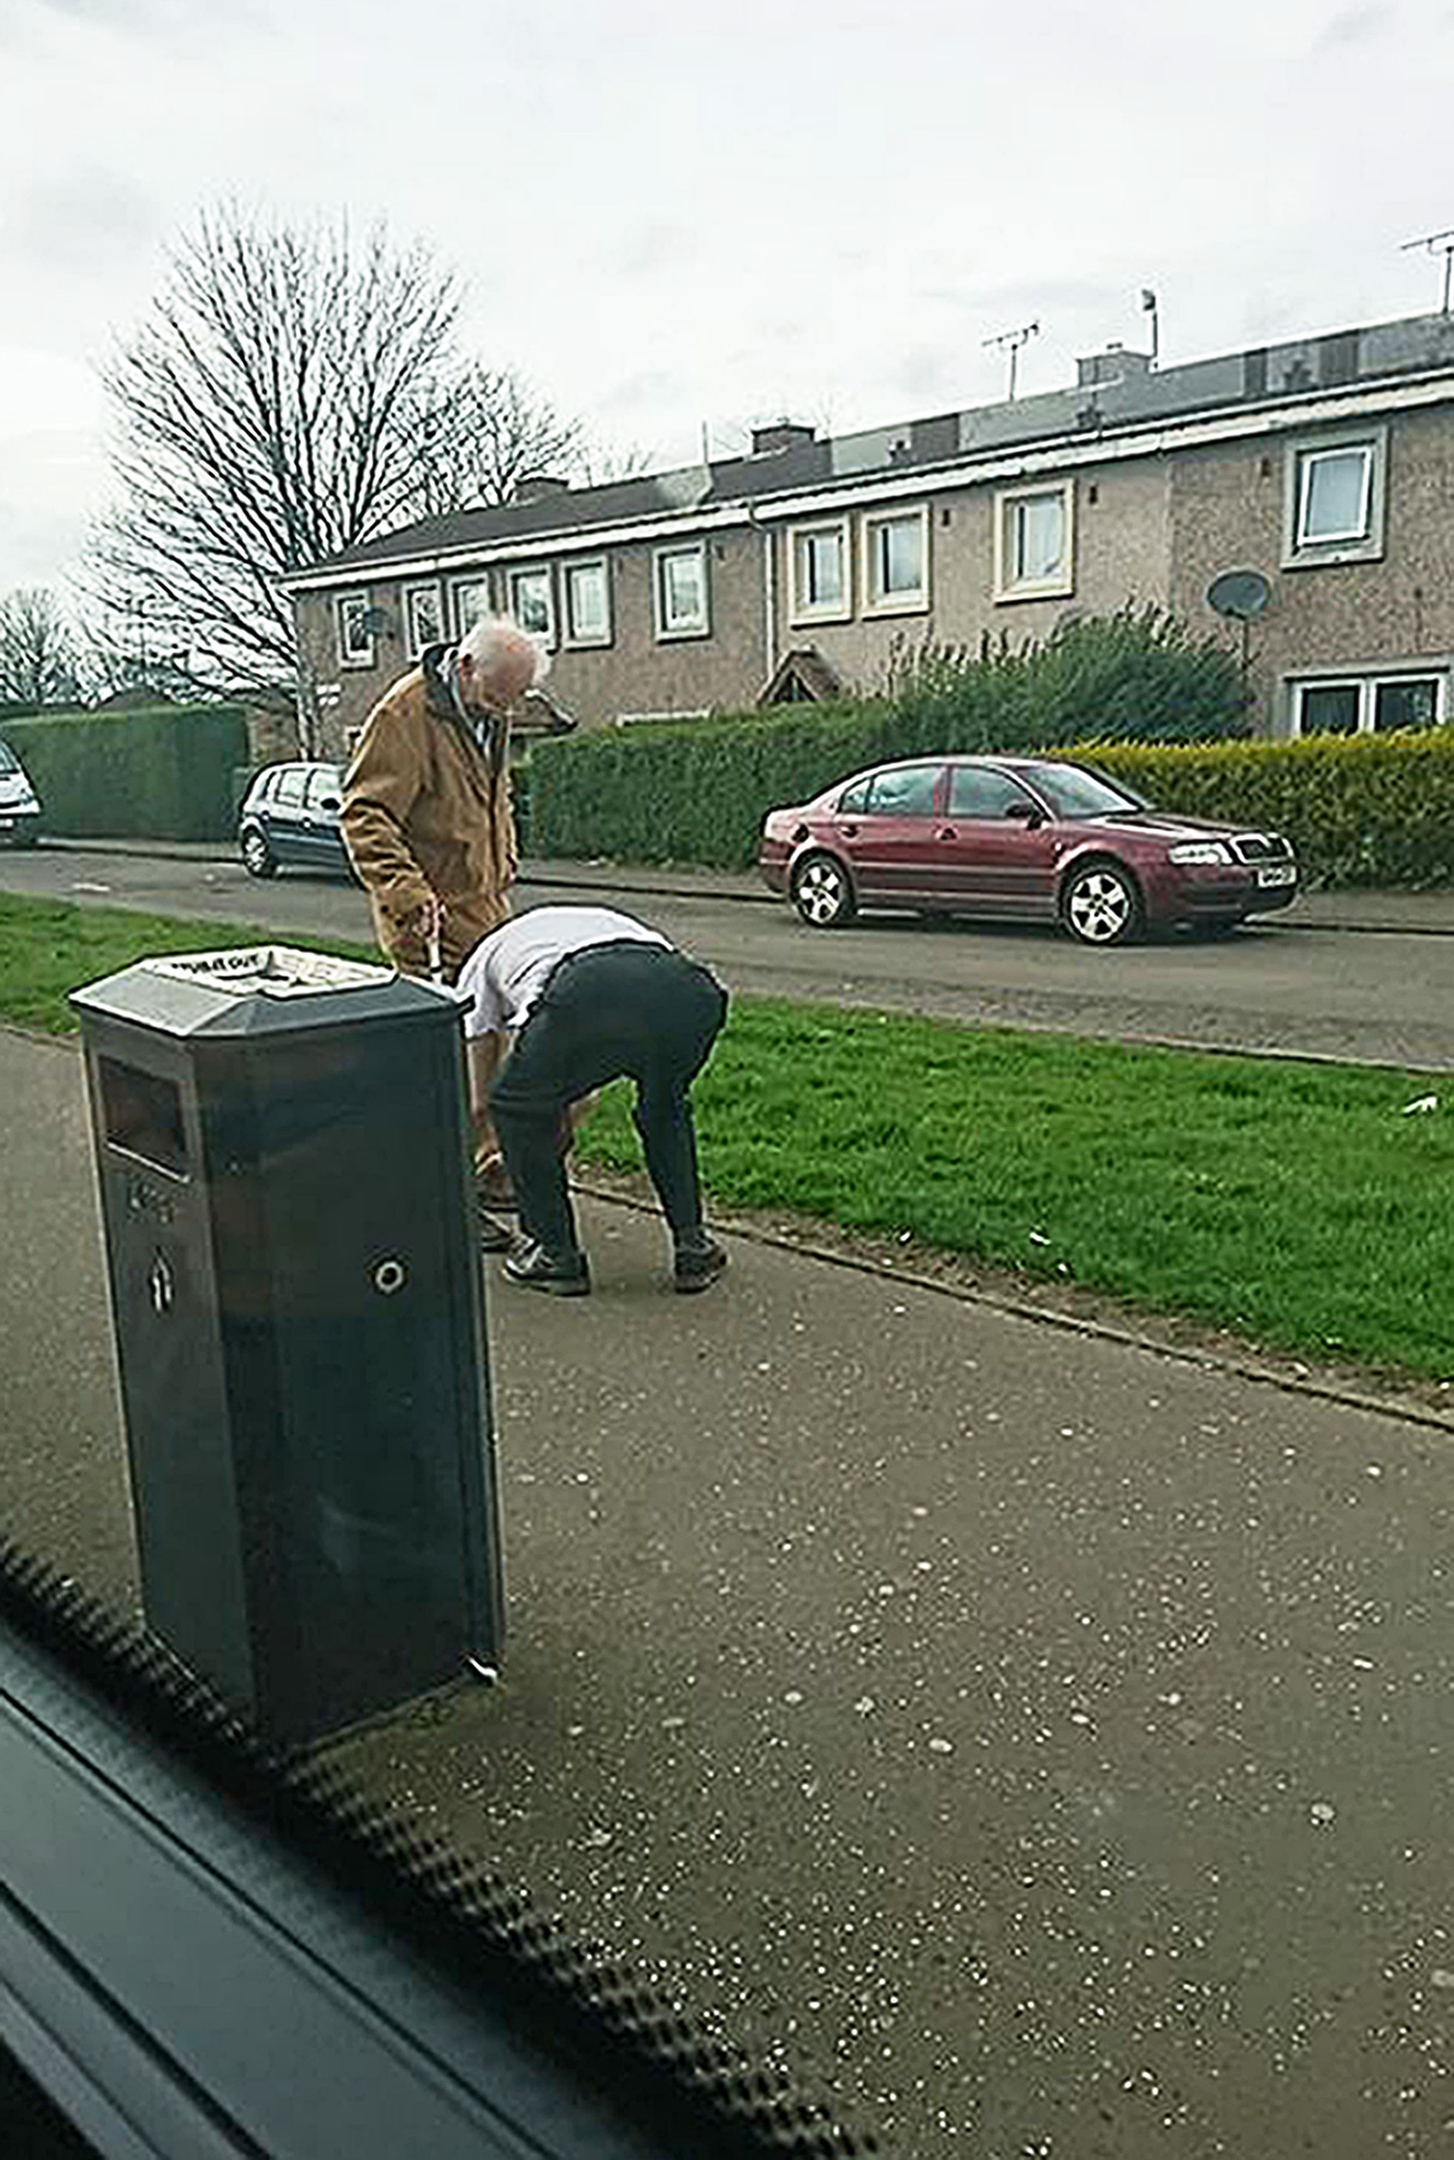 The caring gesture was snapped by passenger Leah-Ashley Brown, 34 from Harvesters Square in Wester Hailes, . (Leah-Ashley Brown/PA Wire) Lothian buses